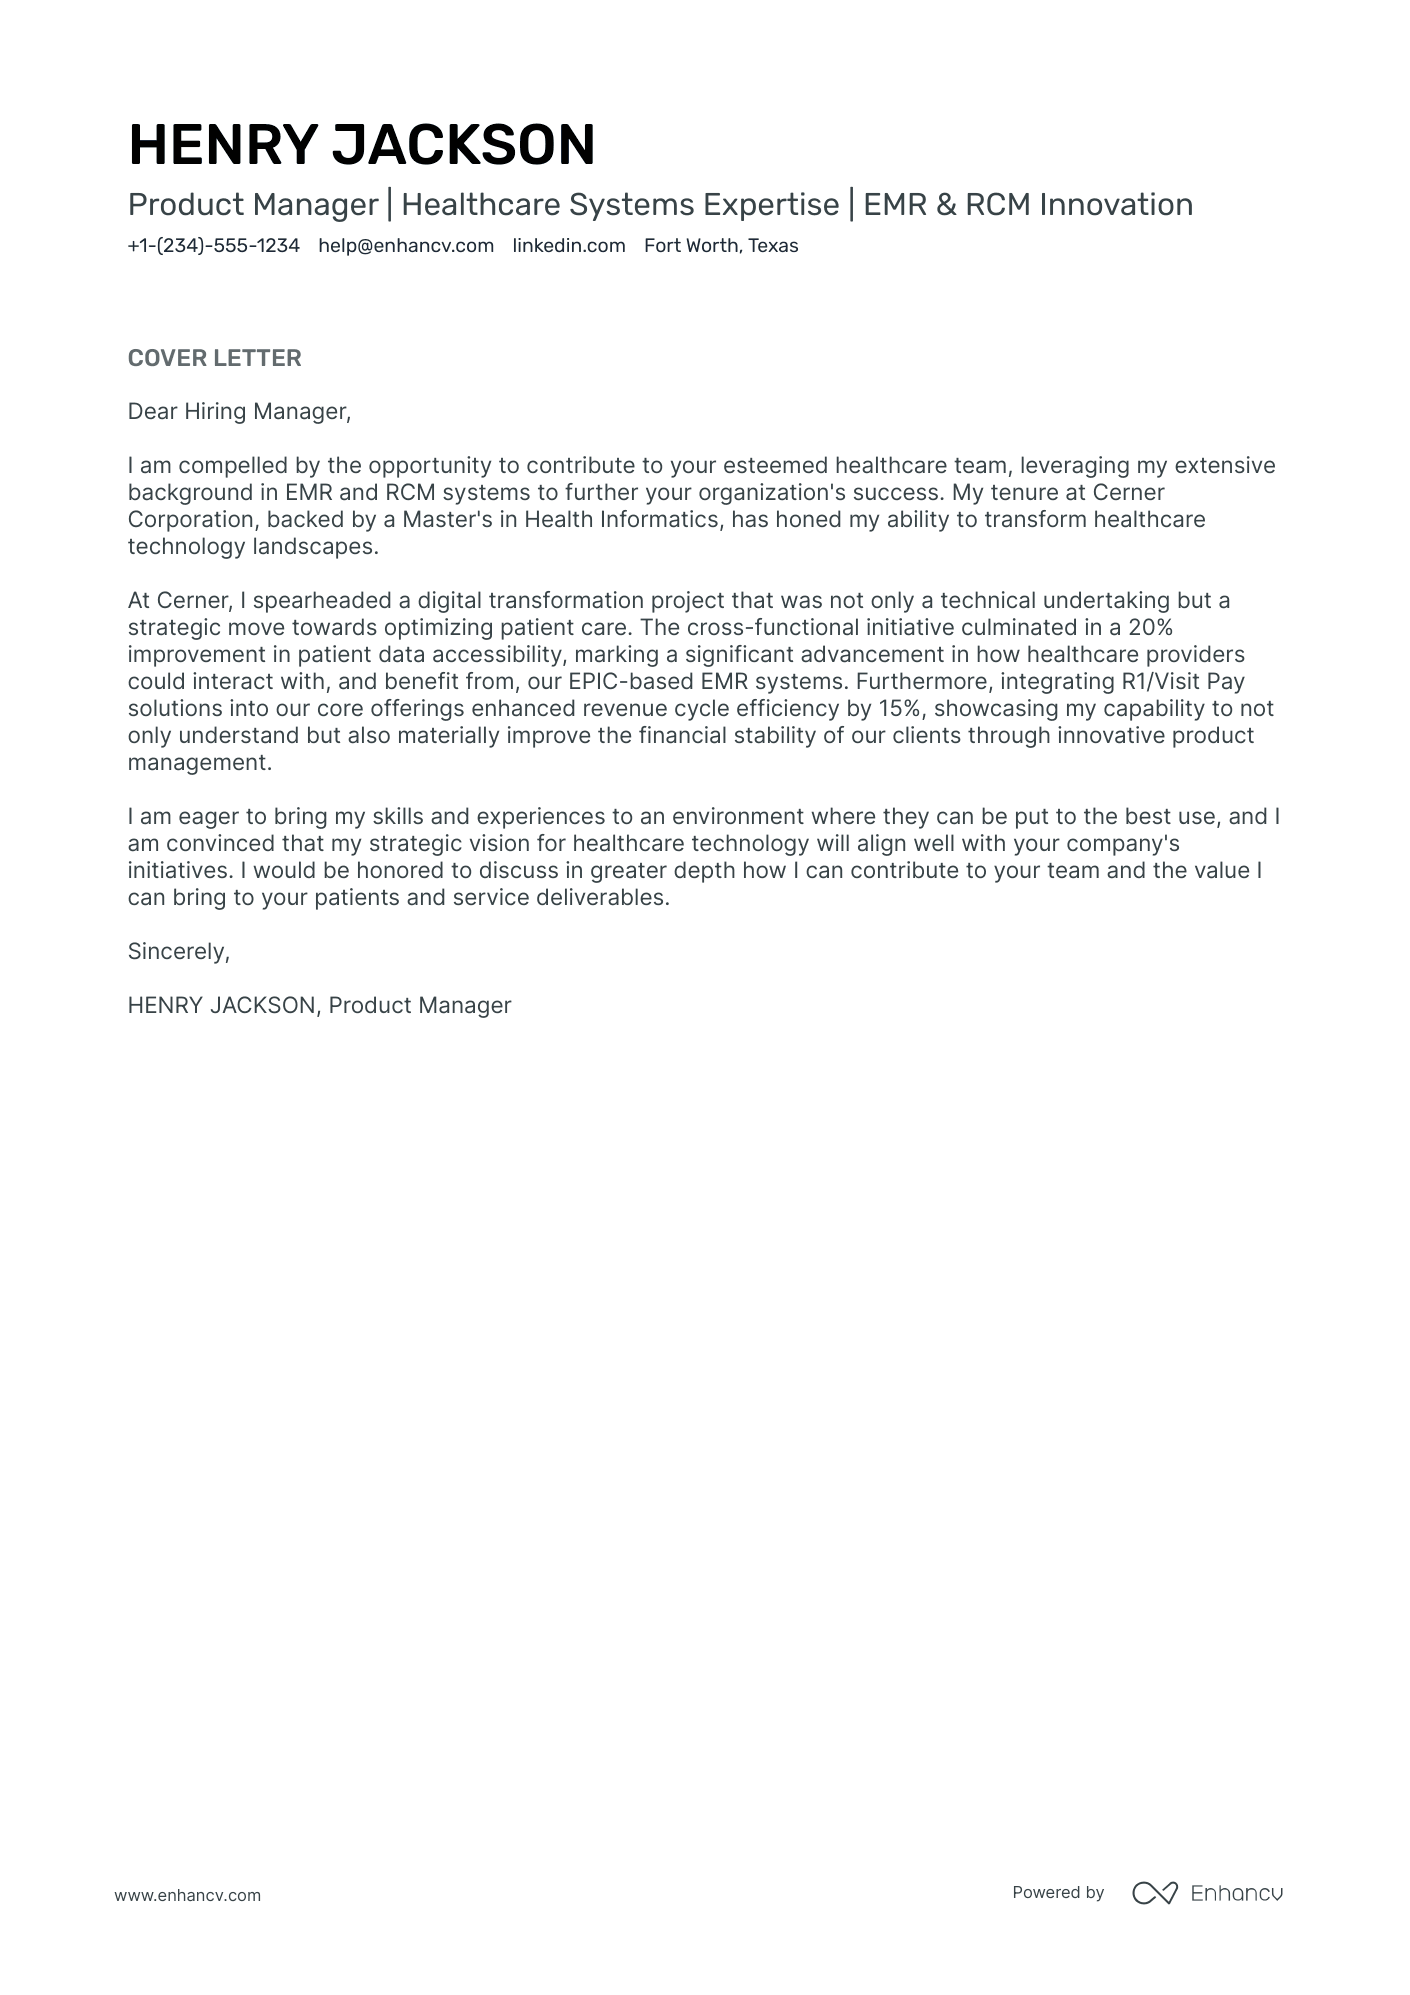 cover letter of product manager